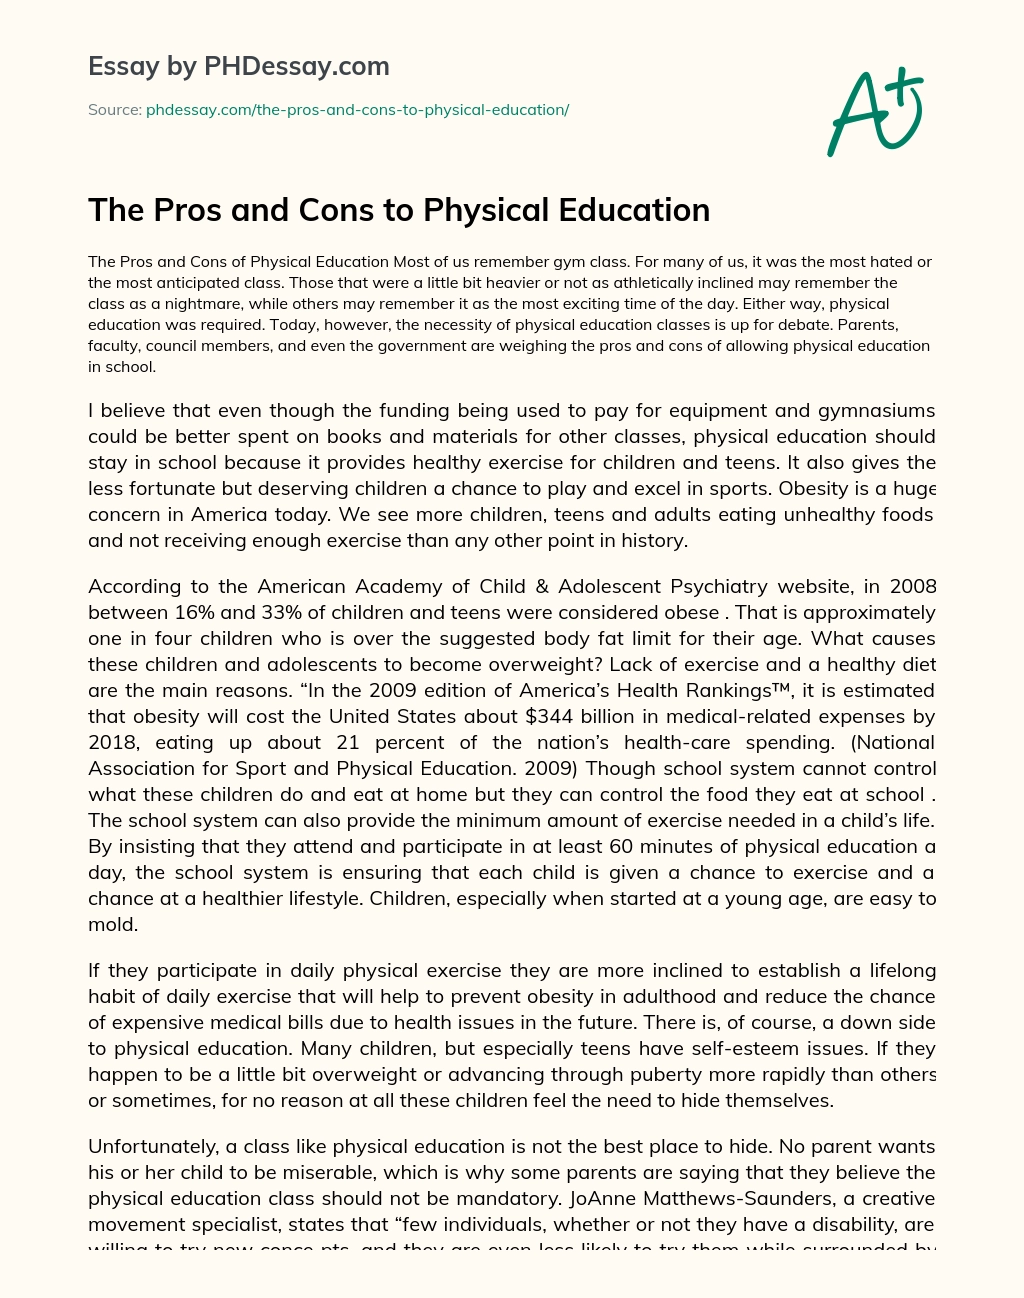 The Pros and Cons to Physical Education essay